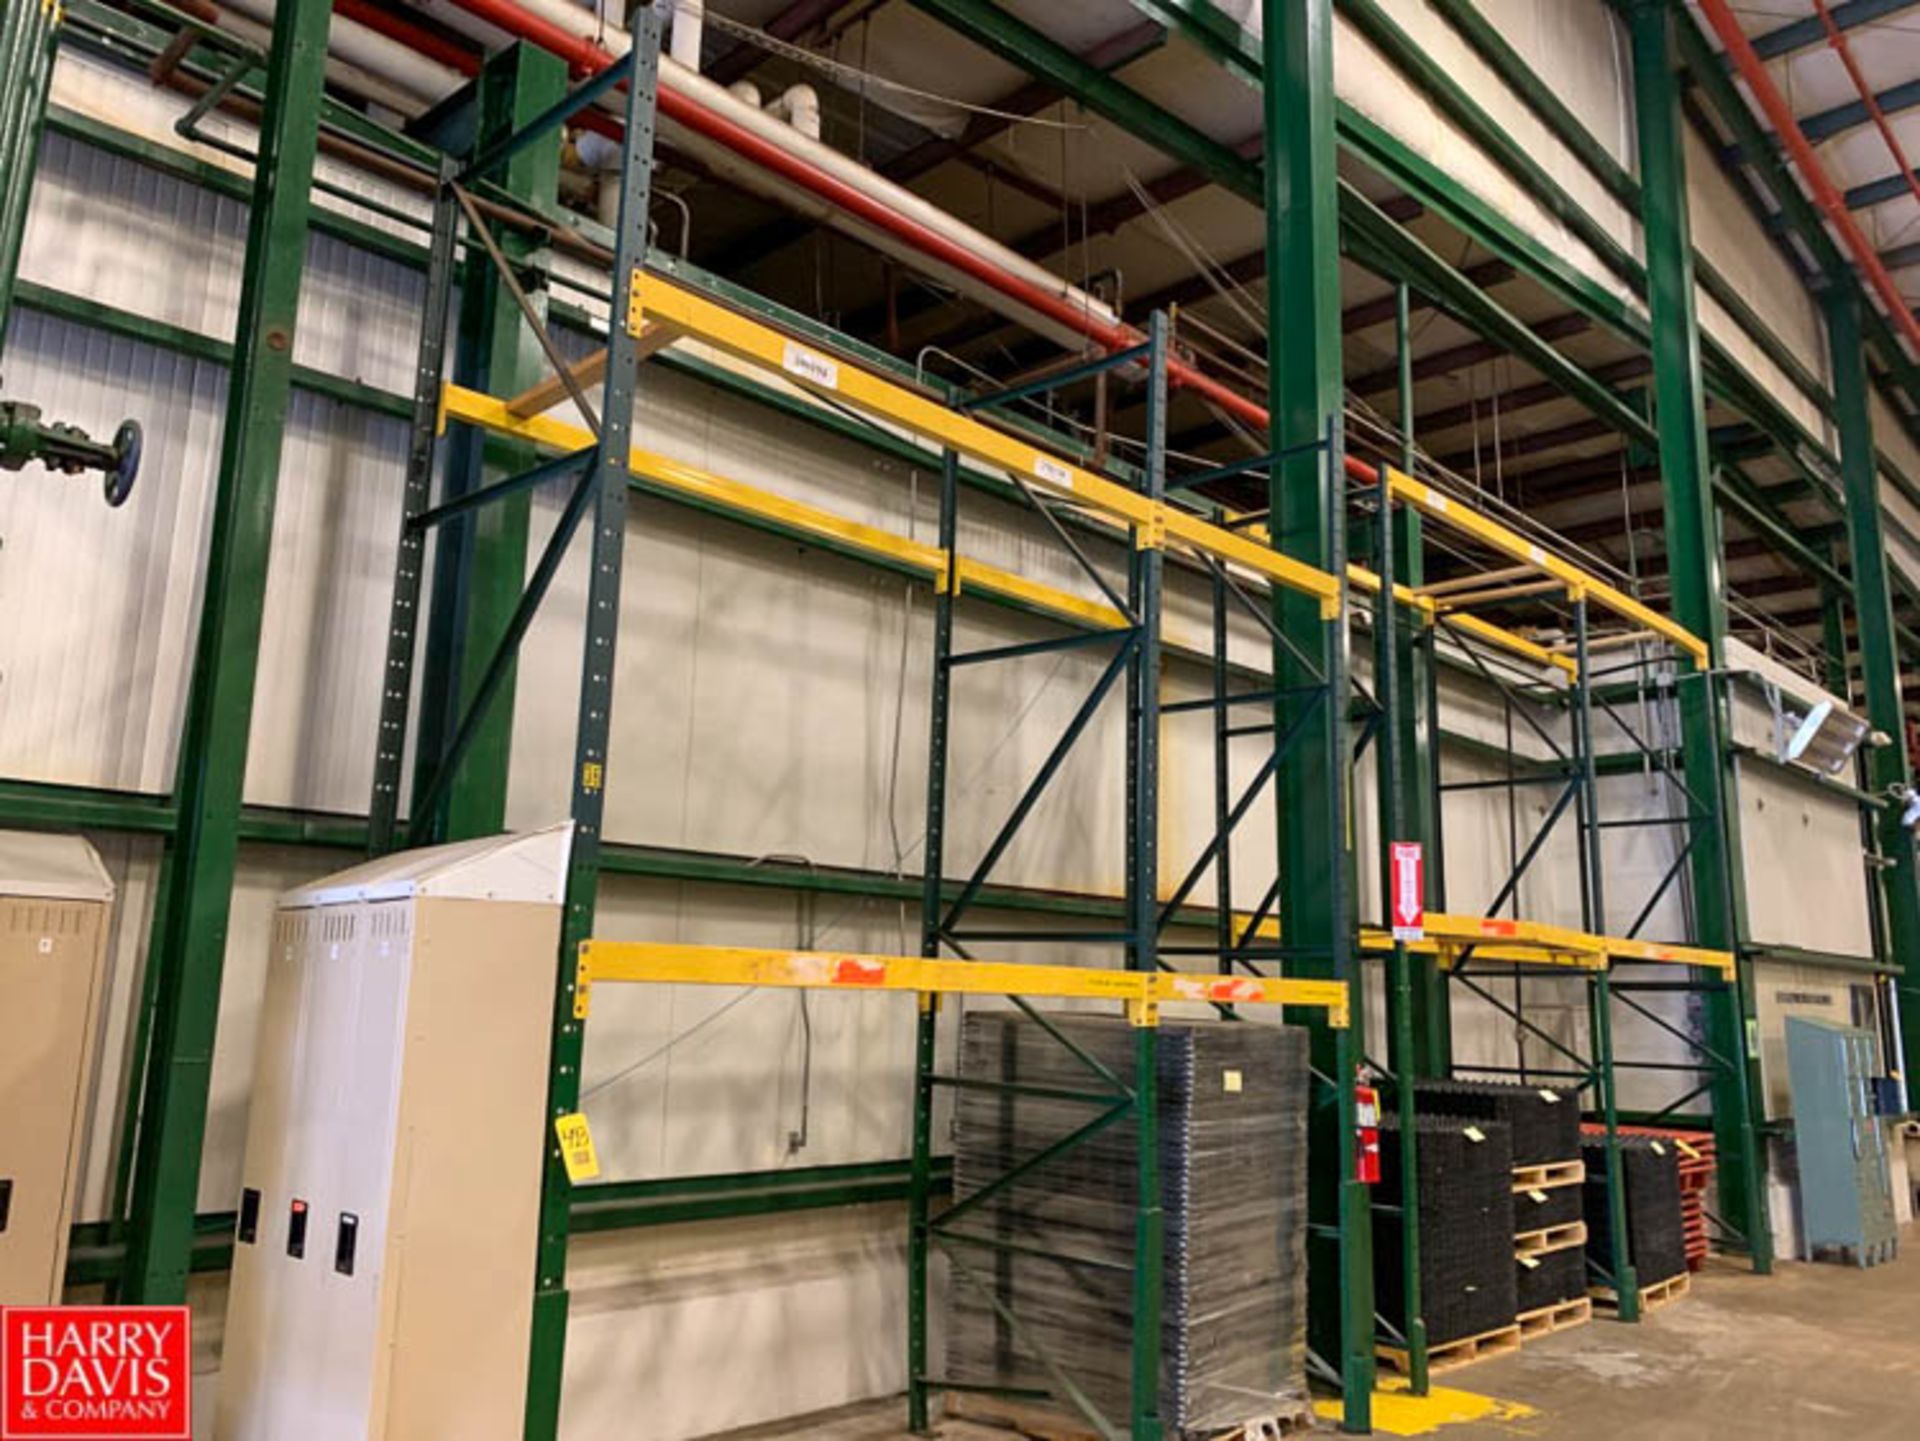 Sections of Pallet Racking Rigging Fee: $400